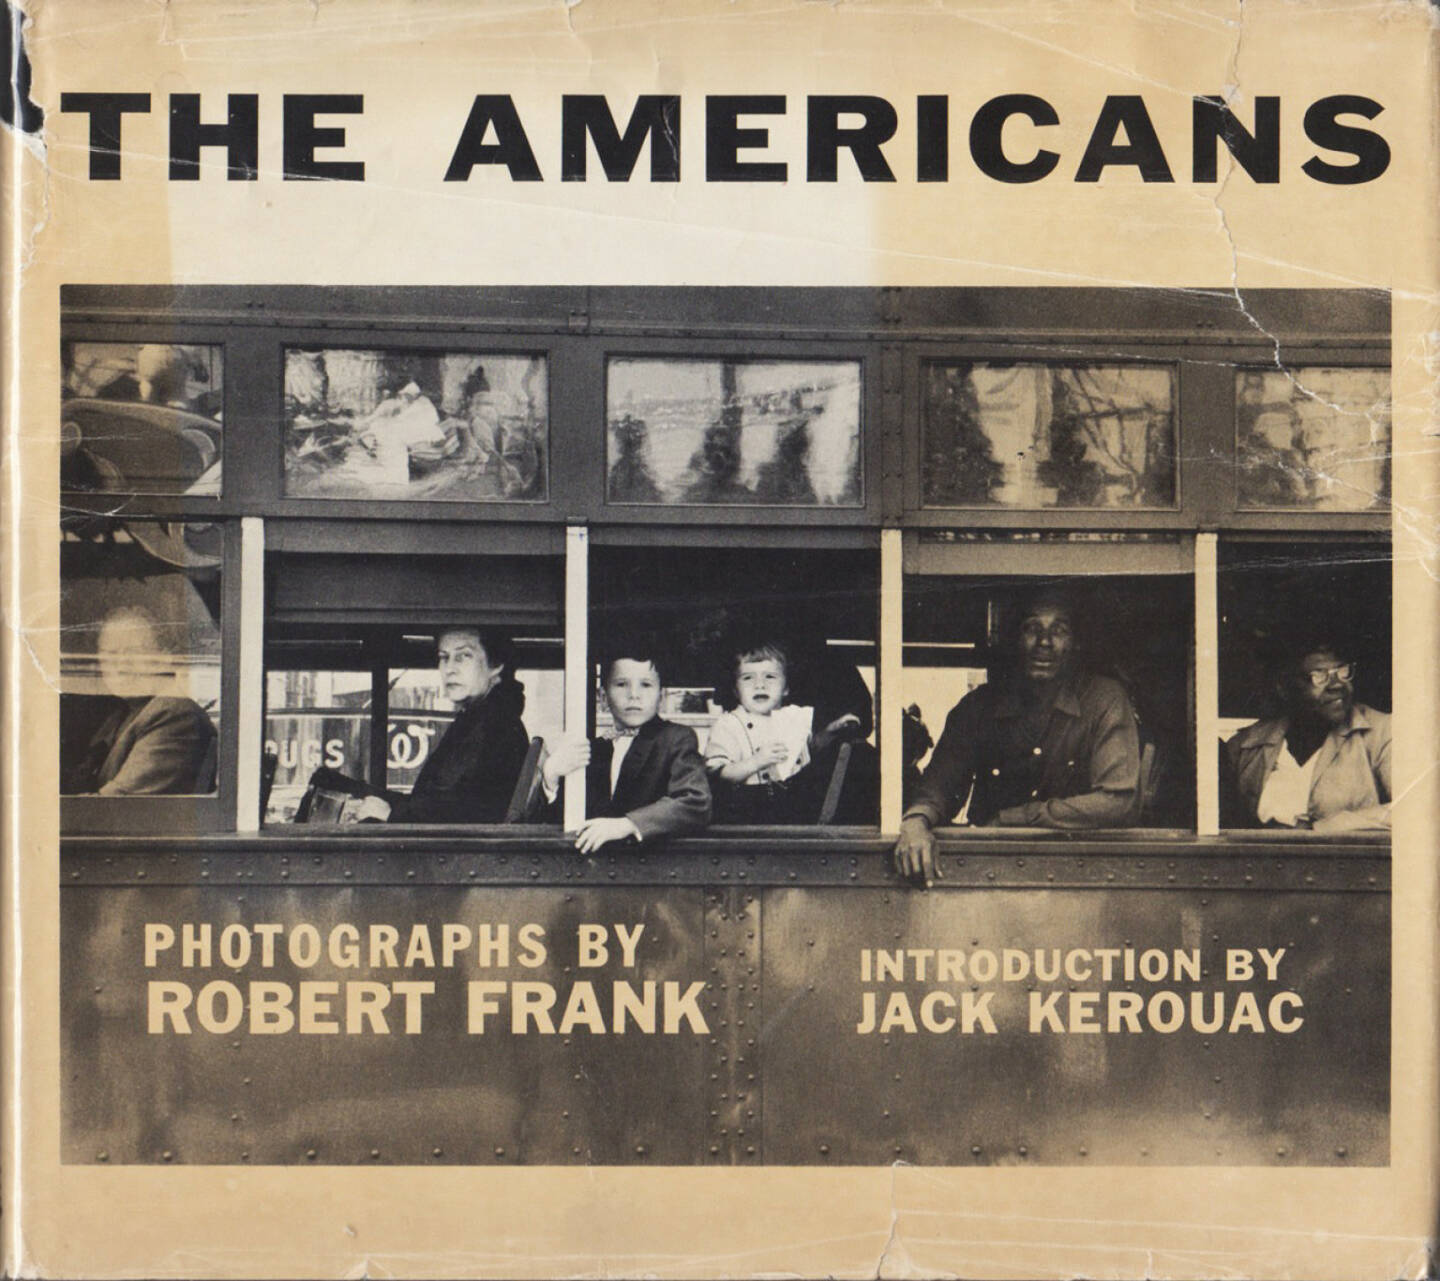 Robert Frank - The Americans, Grove Press 1959, Cover - http://josefchladek.com/book/robert_frank_-_the_americans